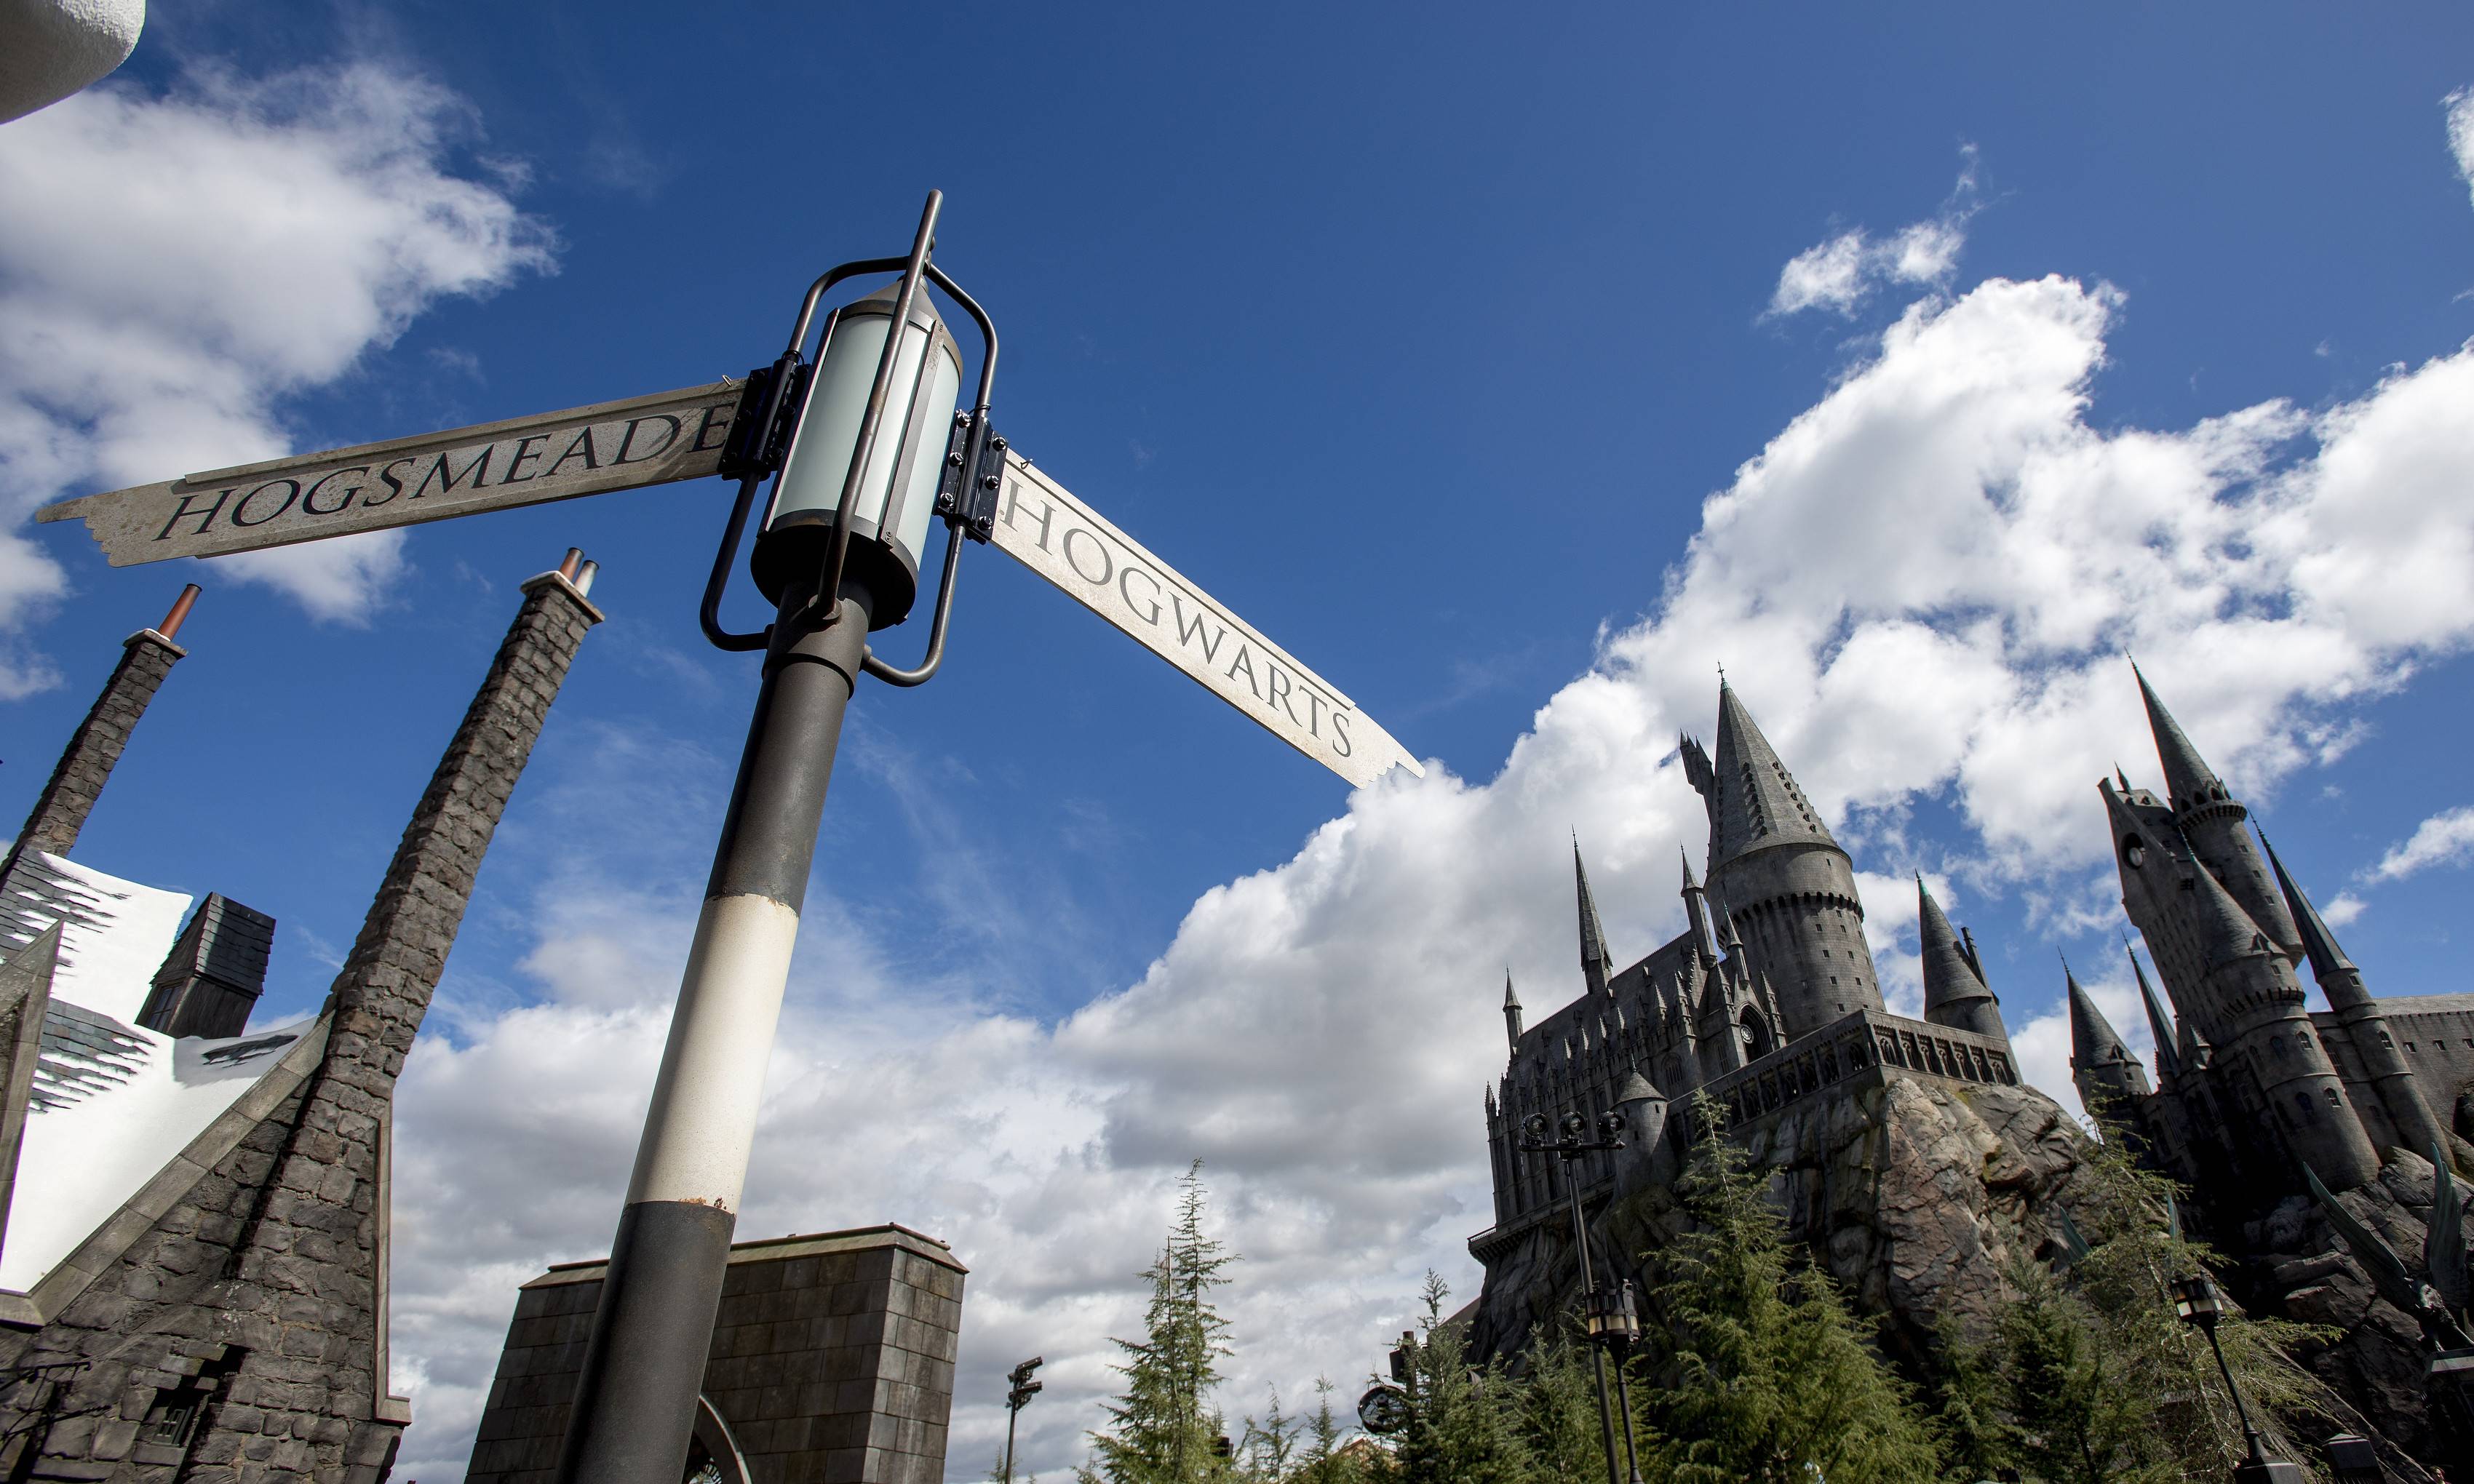 Hogwarts Legacy: Do I Need To Know Harry Potter Books and Movies To Play? -  GameRevolution